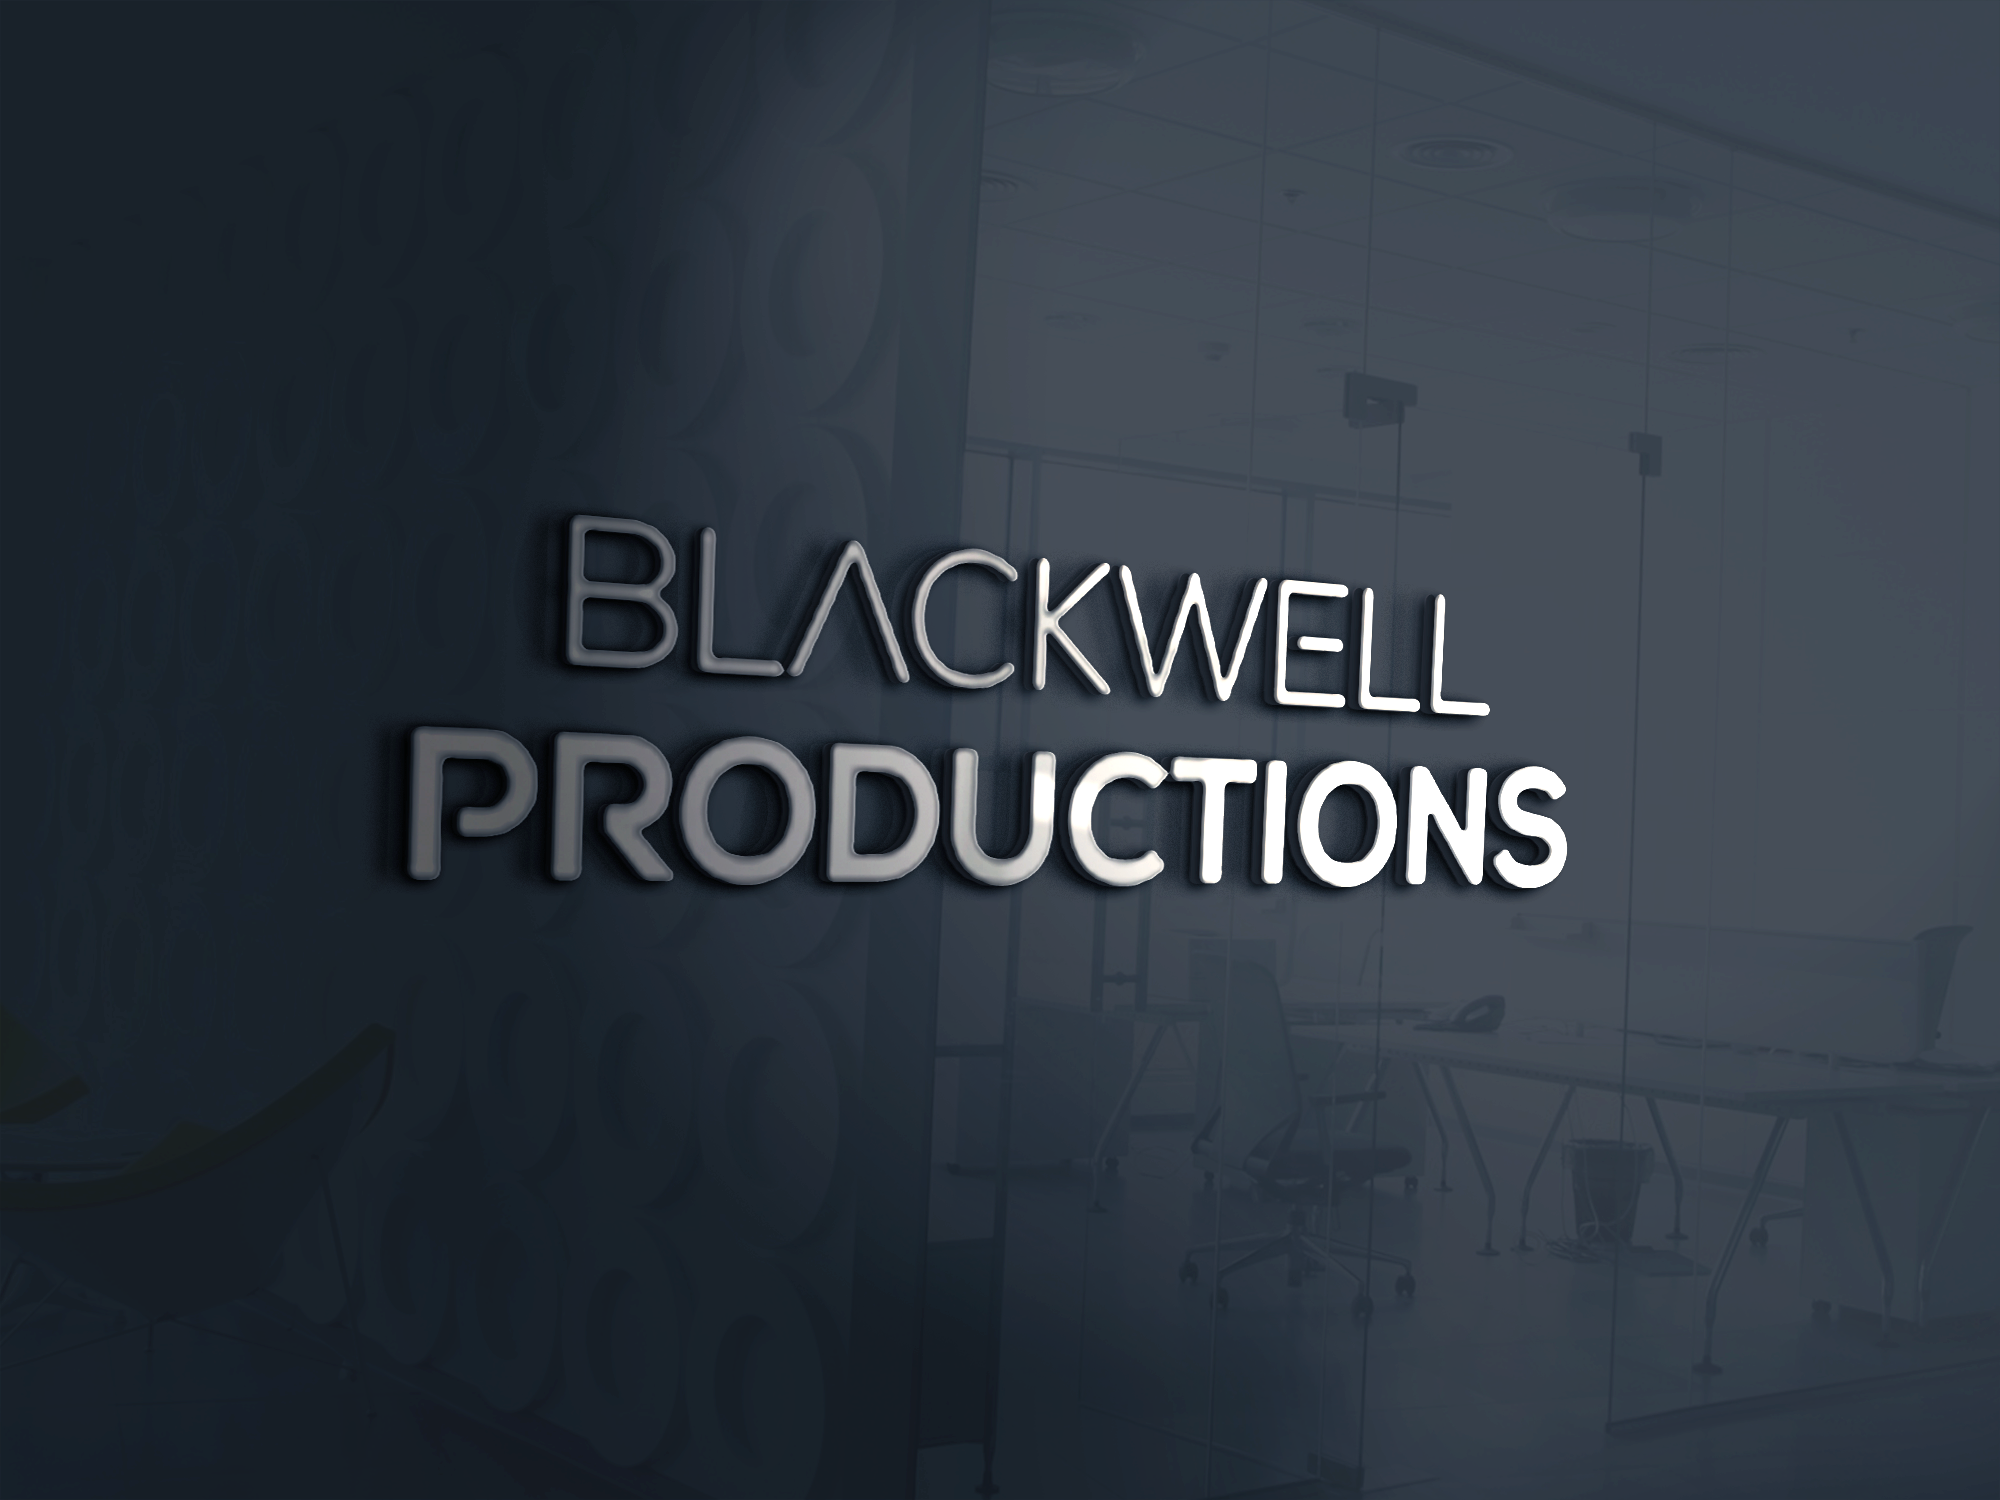 Blackwell Productions